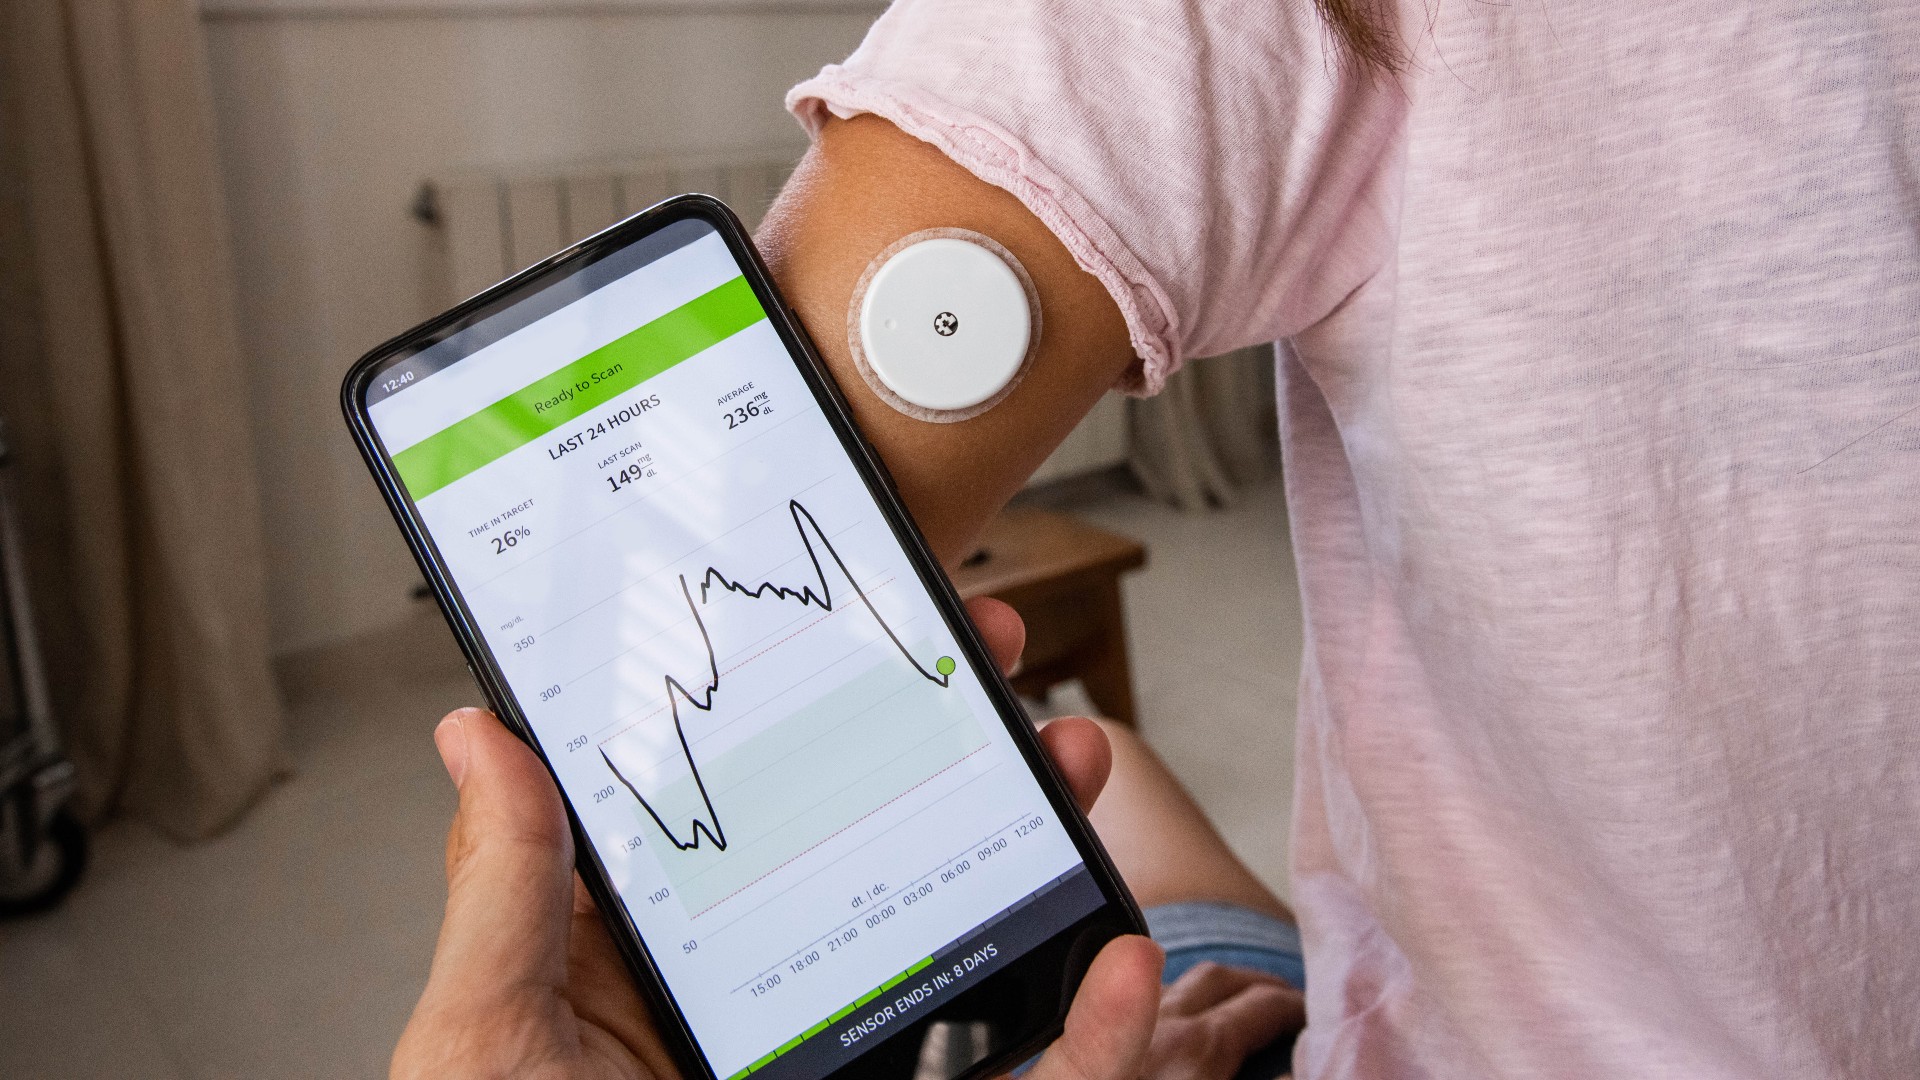 Continuous Glucose Monitoring (CGM) system. Monitoring the levels of glucose in blood using smart phone technology and electrode. Artur Debat via Getty Images